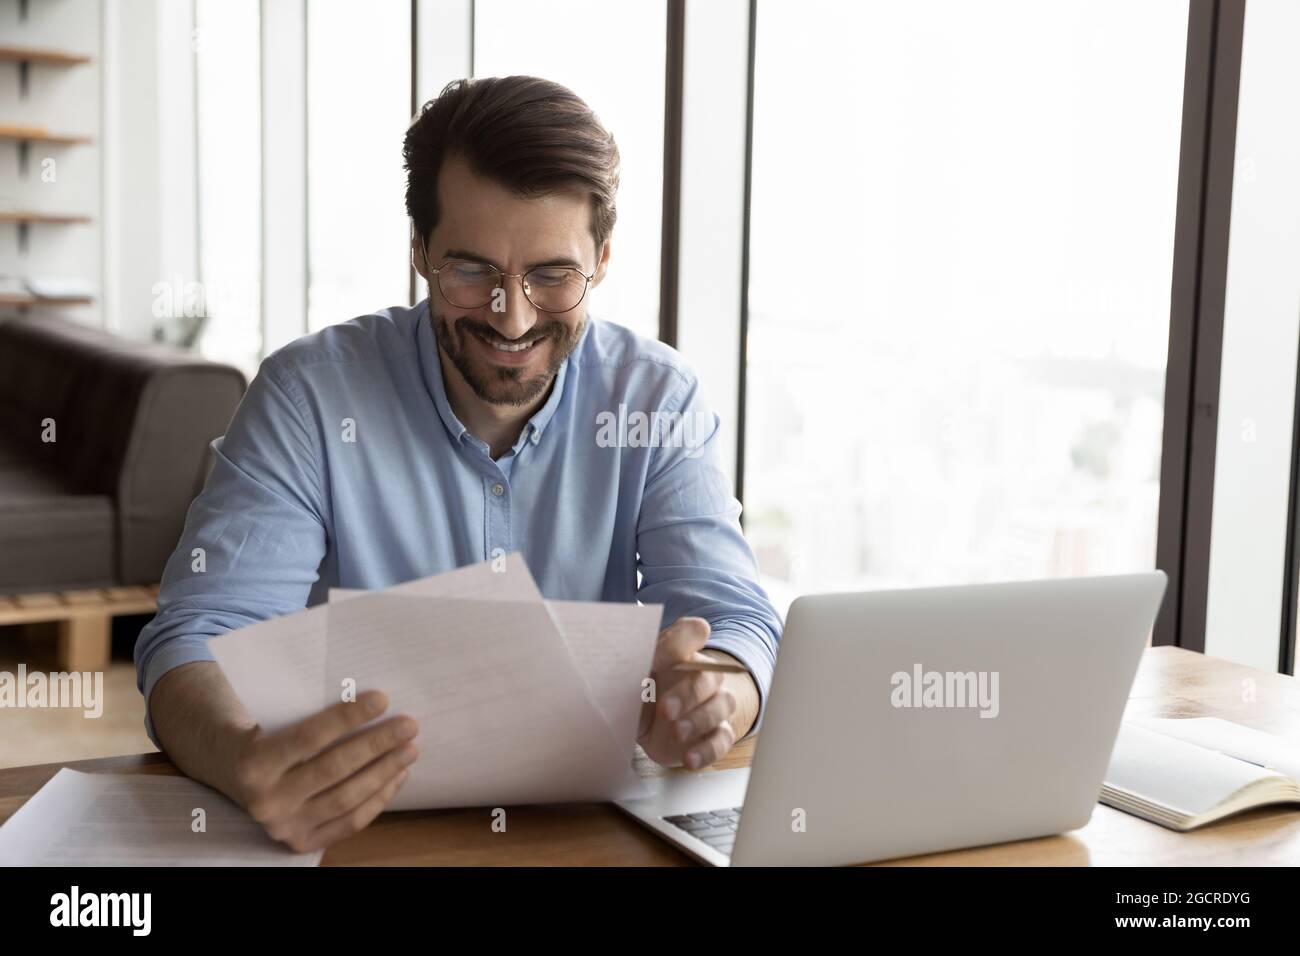 Happy business professional in glasses reviewing official legal documents Stock Photo